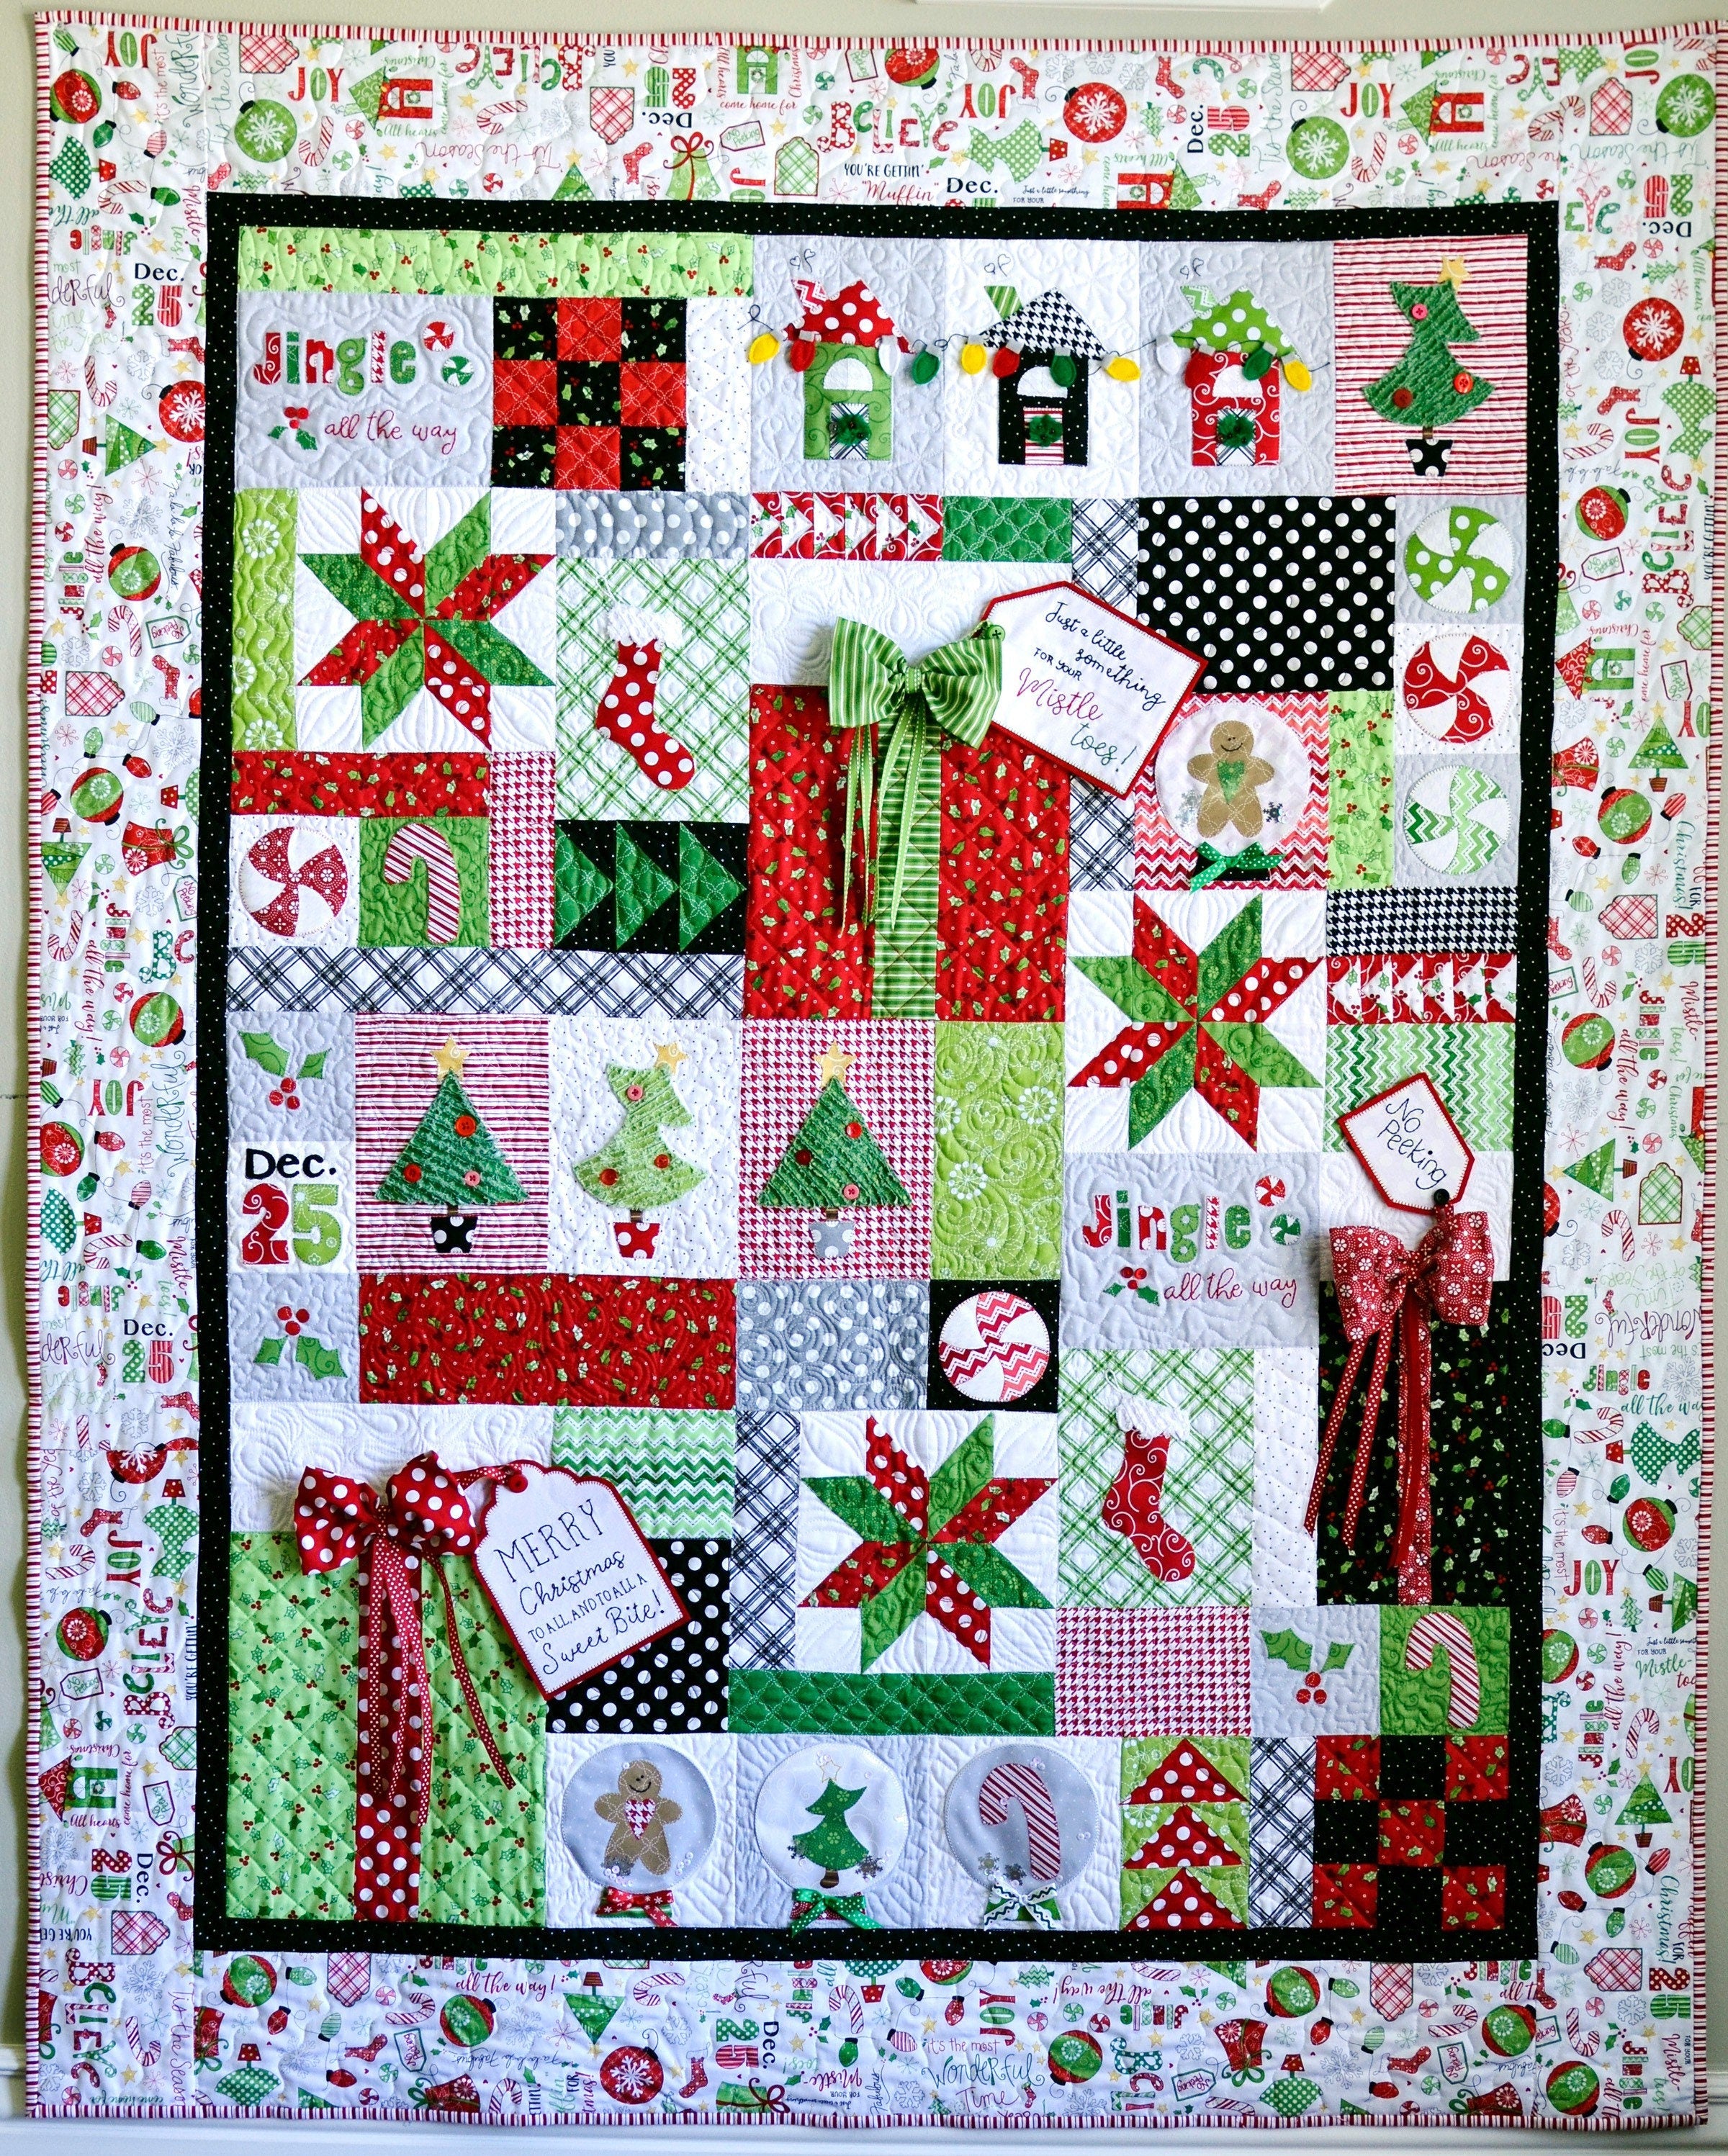 Kimberbell Jingle All the Way (The Sewing Version) Quilt Pattern Book with CD by Kim Christopherson for Kimberbell